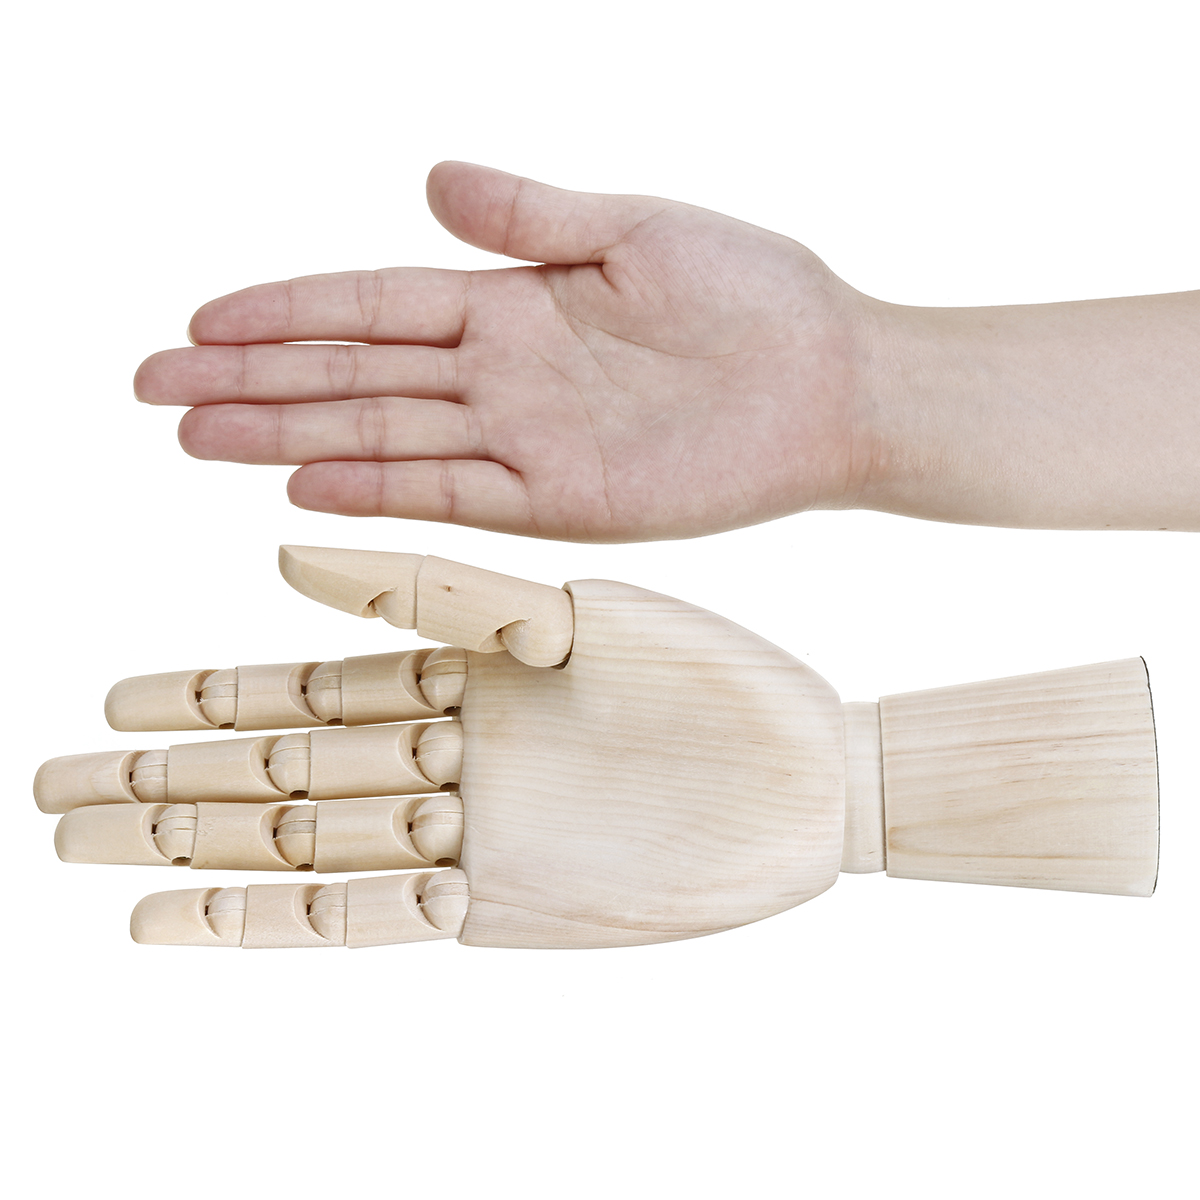 781012-Inch-Wooden-Hand-Body-Artist-Medical-Model-Flexible-Jointed-Wood-Sculpture-DIY-Education-1322443-5